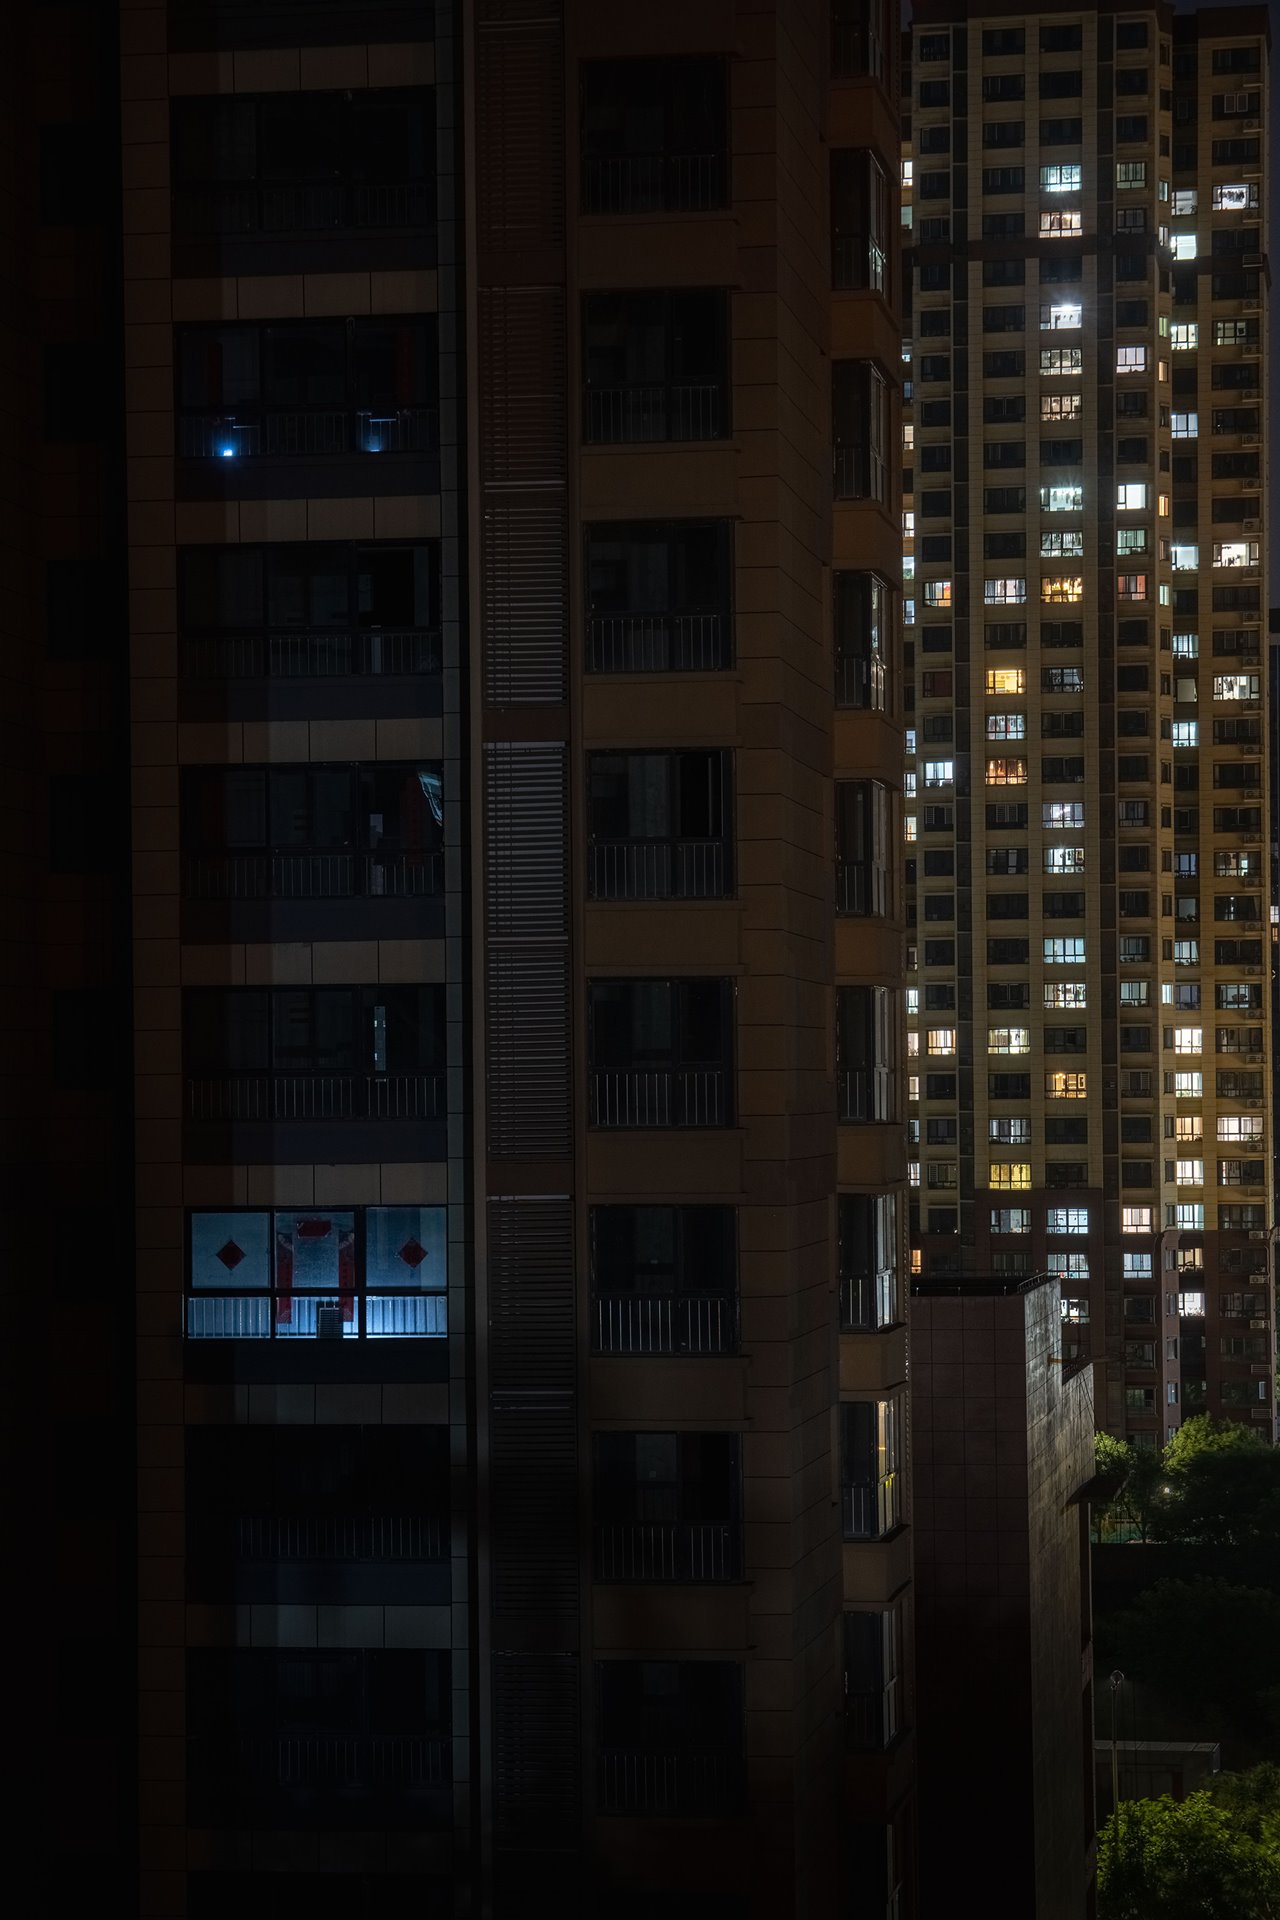 <p>A solar powered light illuminates an unfinished apartment in the city of Xi&rsquo;an, China. By some estimates, as many as 5 percent&nbsp;of new residential developments in major Chinese cities have not been completed, affecting hundreds of thousands of homeowners.</p>
